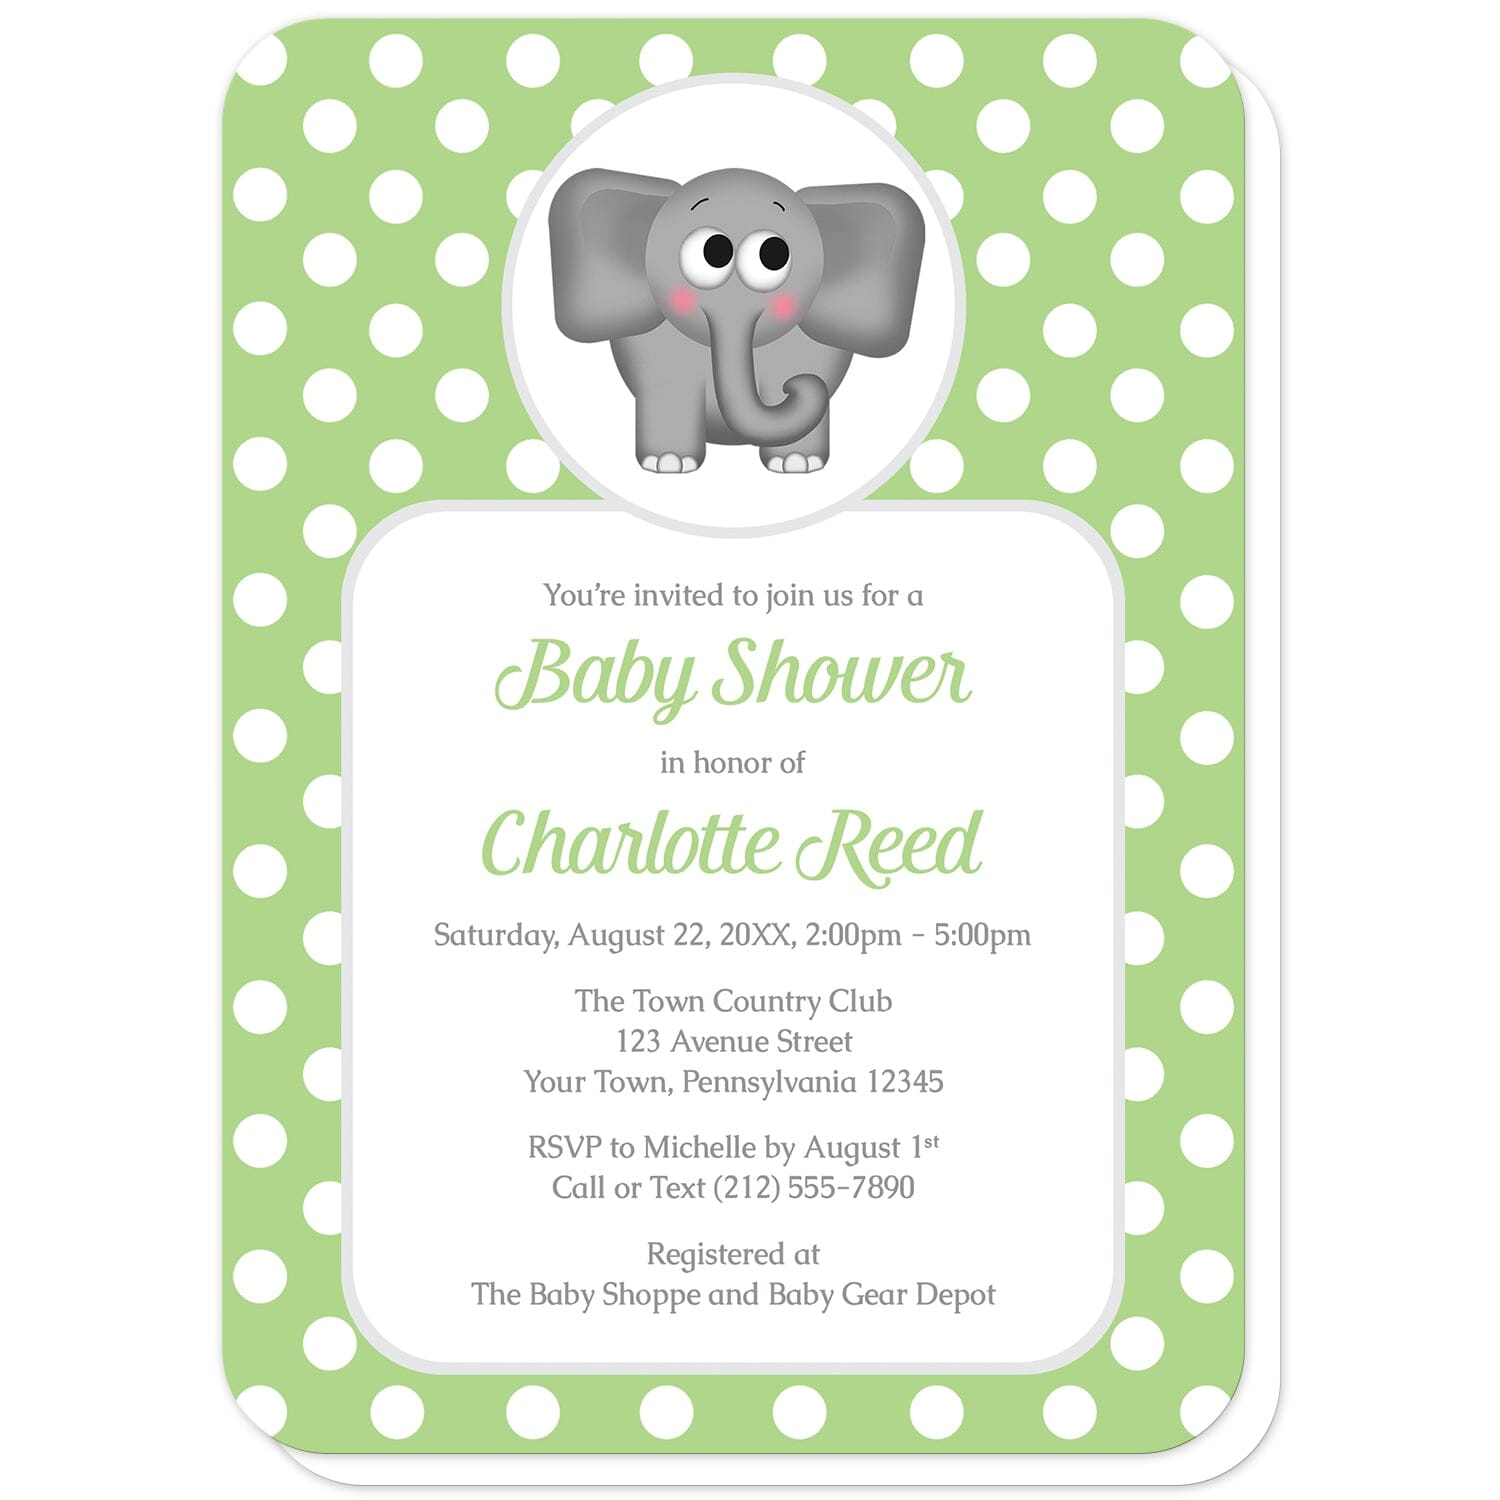 Cute Elephant Green Polka Dot Baby Shower Invitations (with rounded corners) at Artistically Invited. Cute elephant green polka dot baby shower invitations that are illustrated with an affectionate and adorable gray elephant over a green polka dot background. Your personalized baby shower details are custom printed in green and gray over a white rectangular area over the green polka dot background.